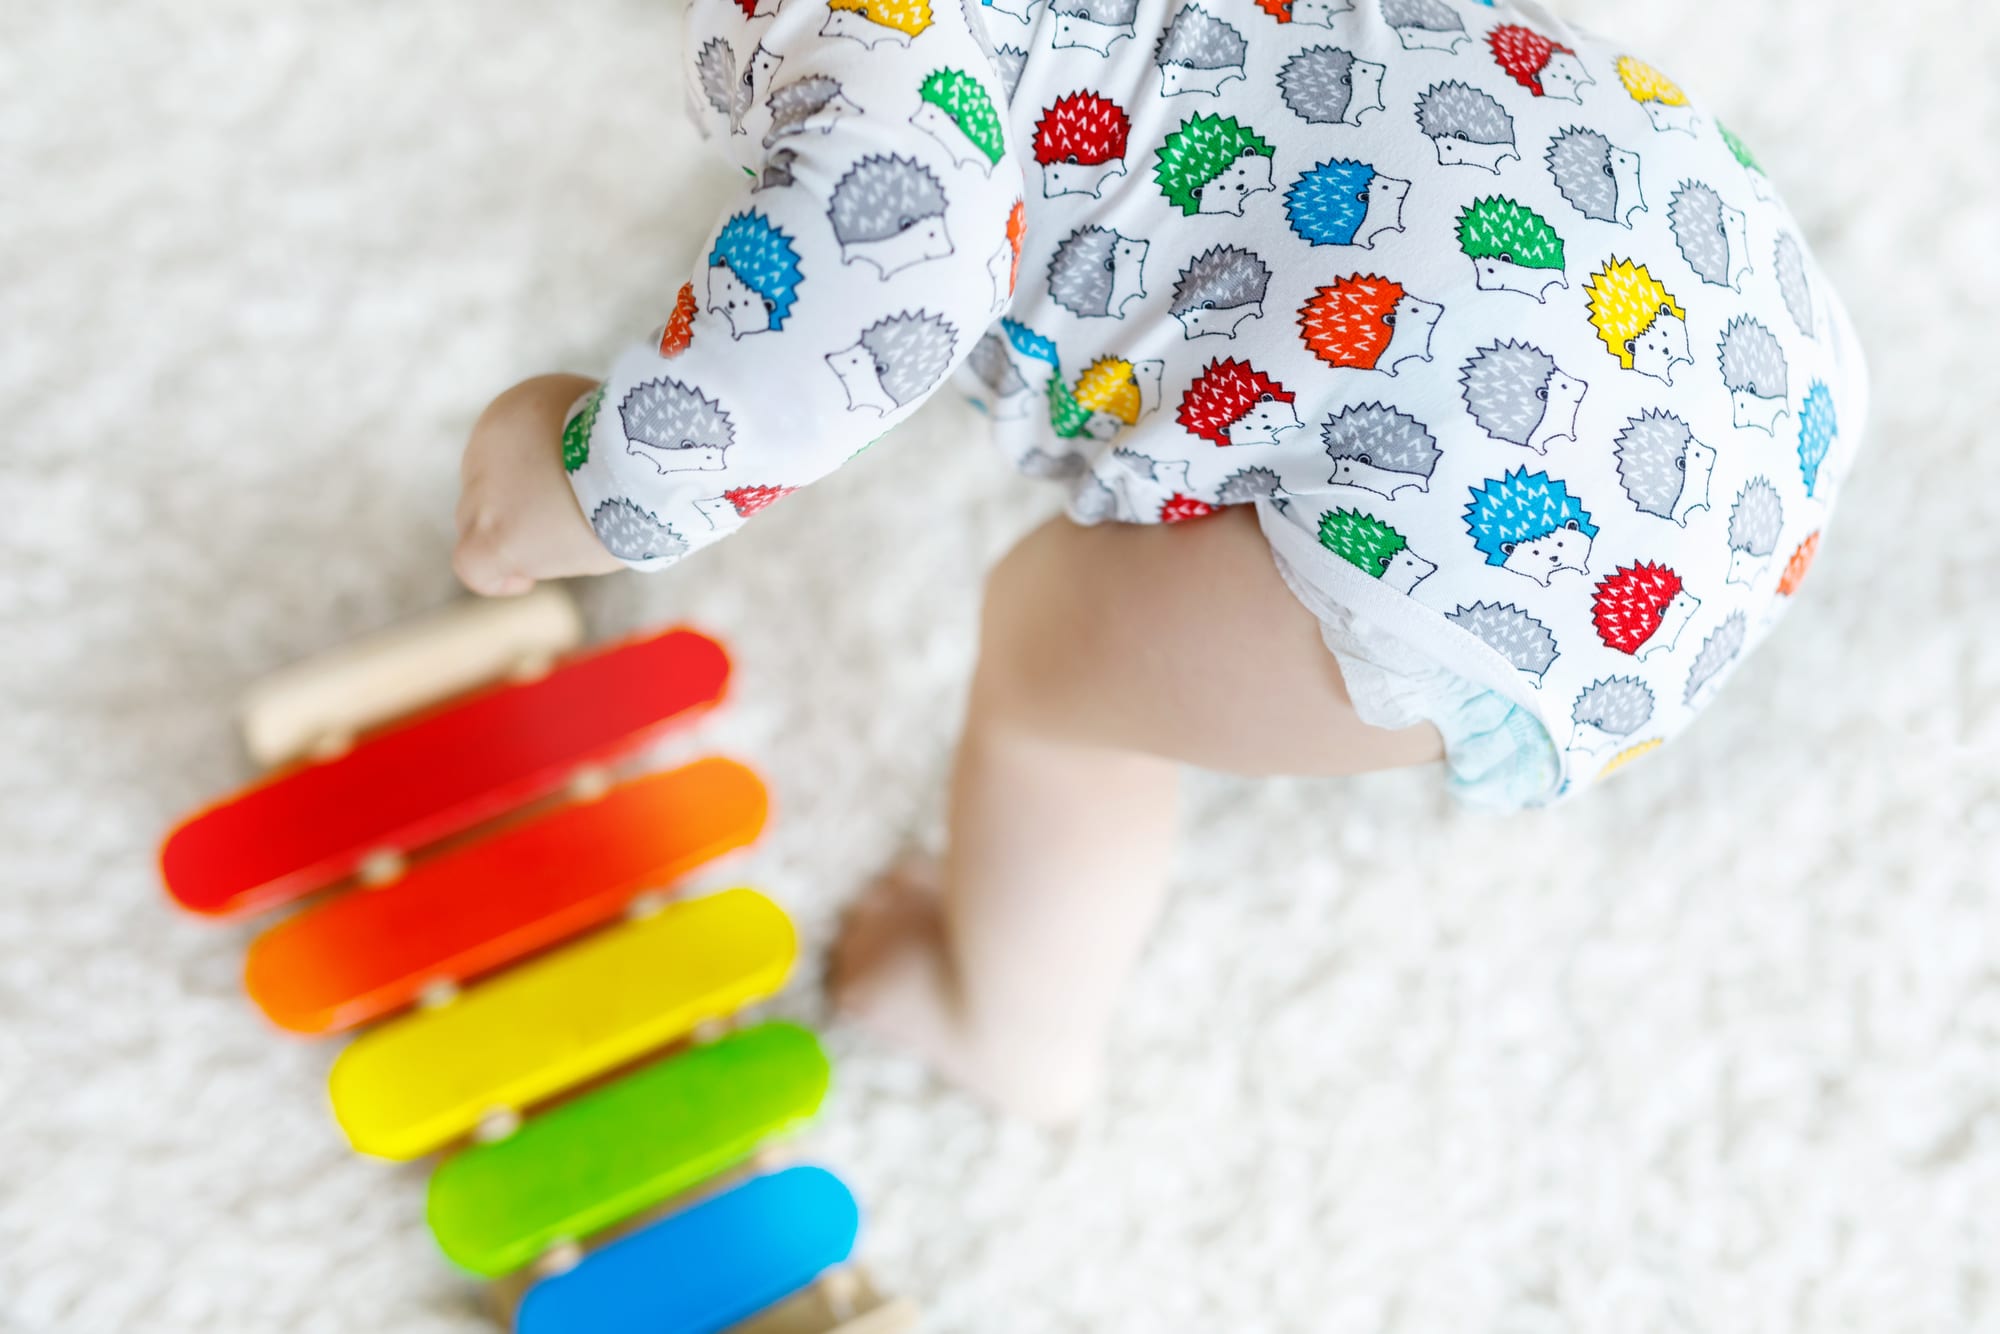 Stem activities for babies and toddlers #STEM #STEMactivitiesforbabies